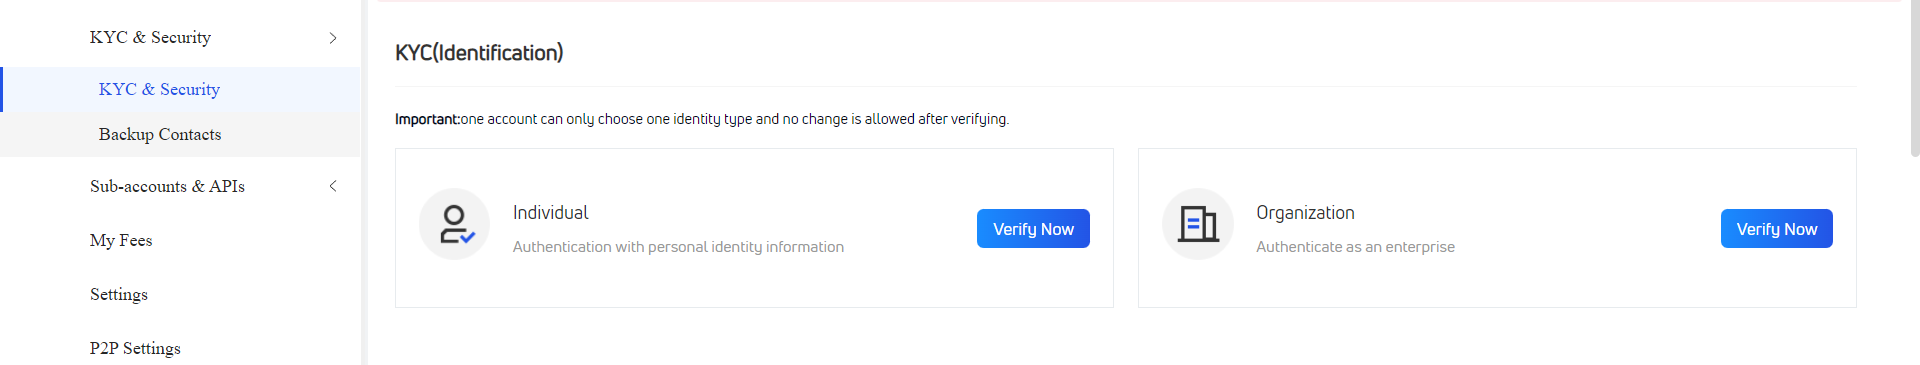 In the KYC & Security tab, click Verify Now button